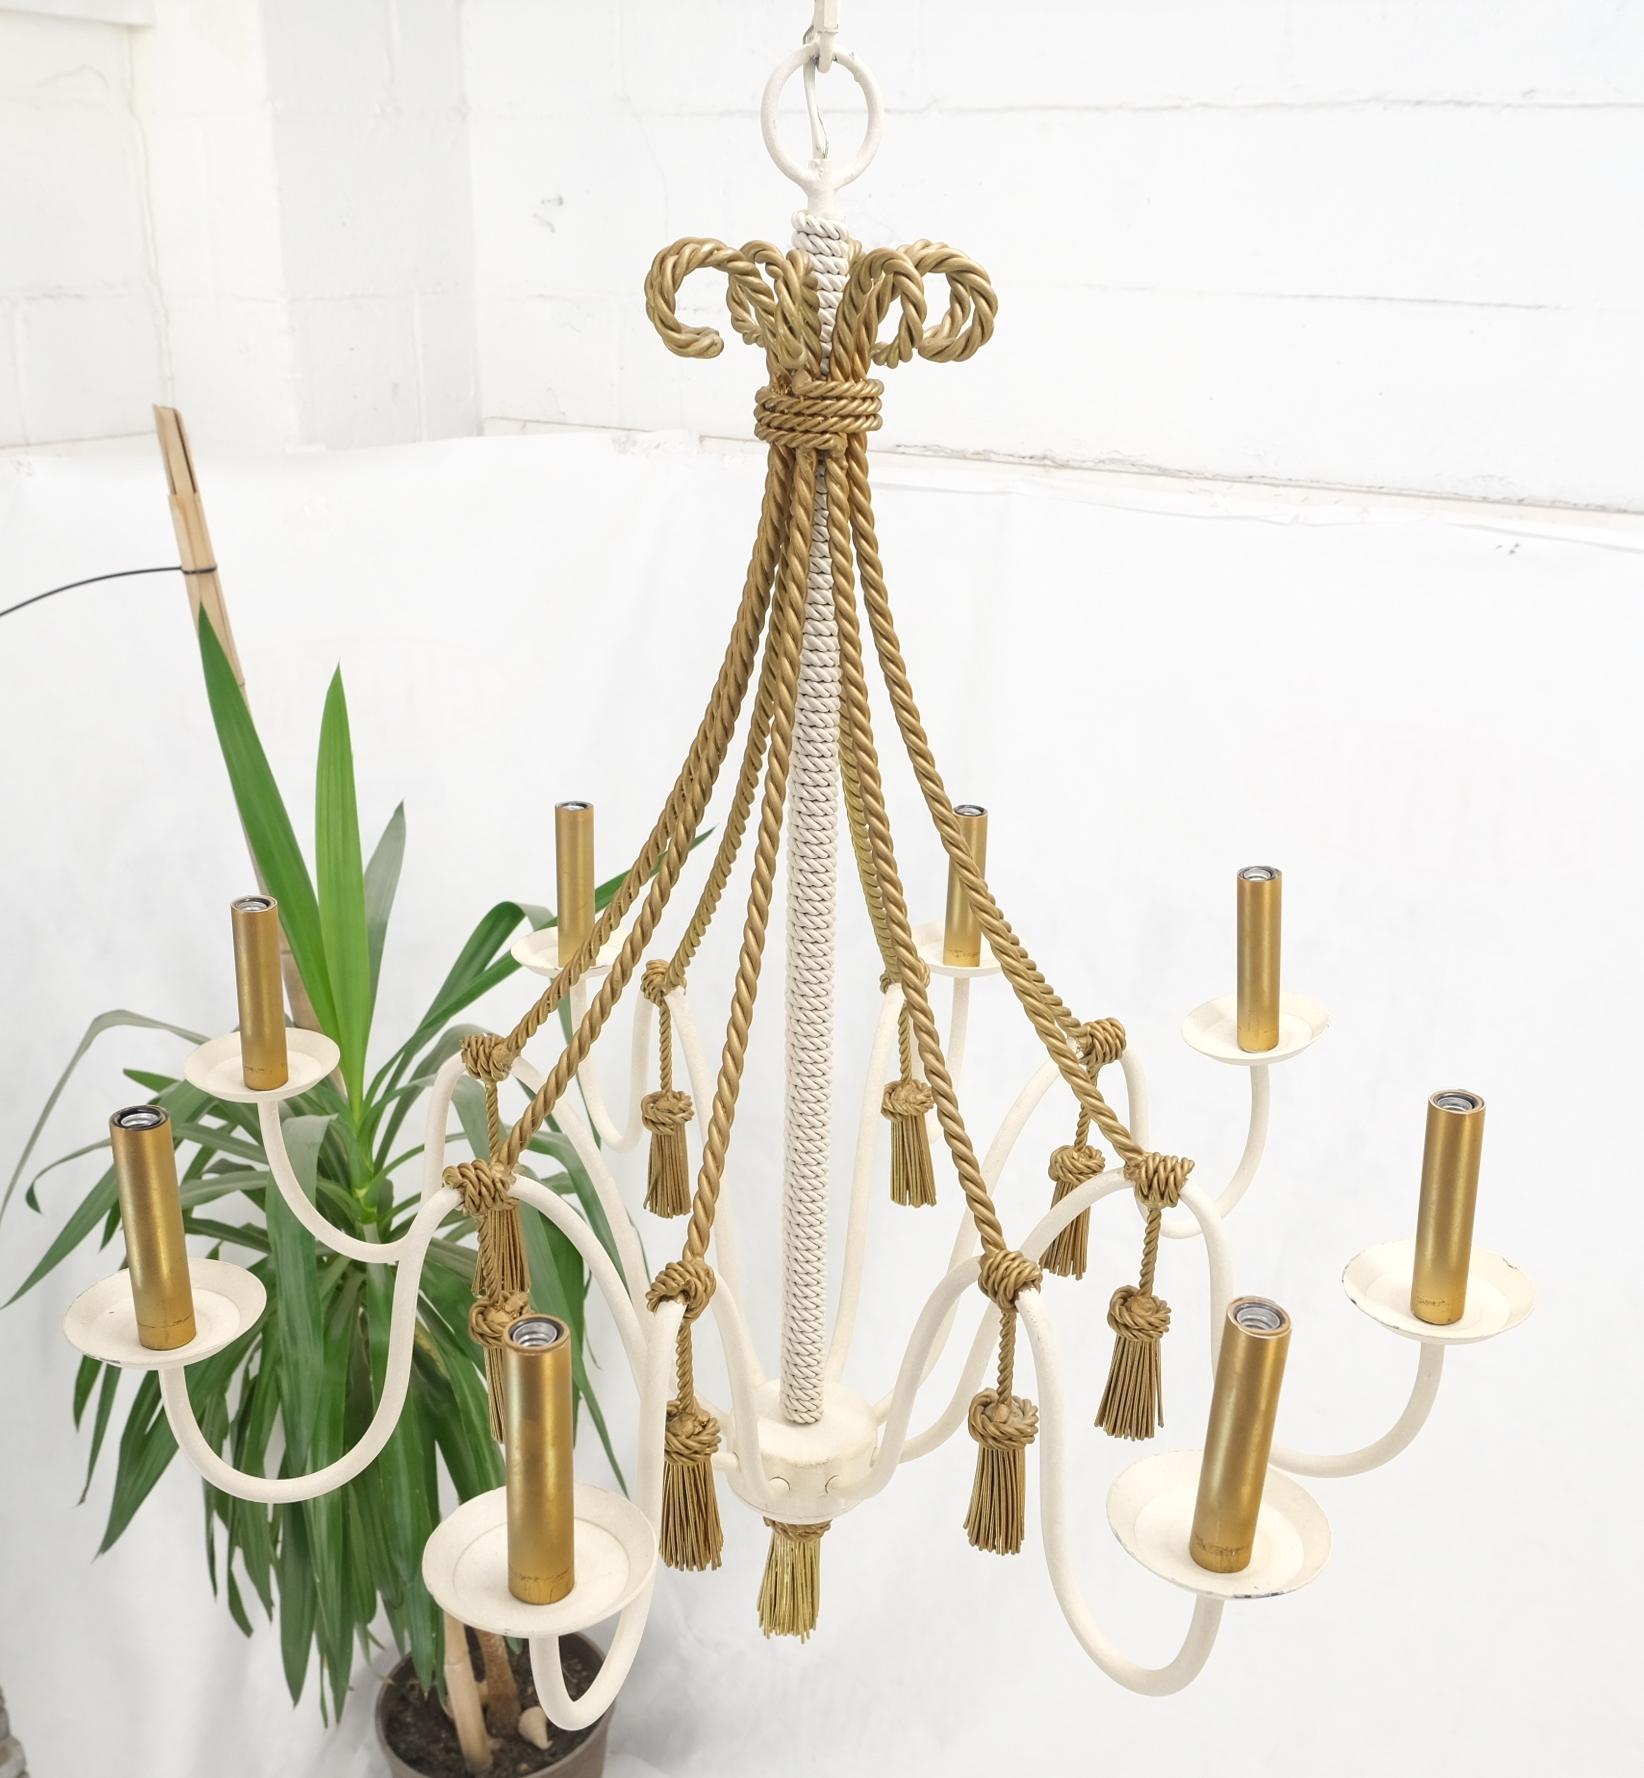 Metal Tassels & Twisted Rope Motive 8 Candles Light Fixture Chandelier MINT For Sale 4